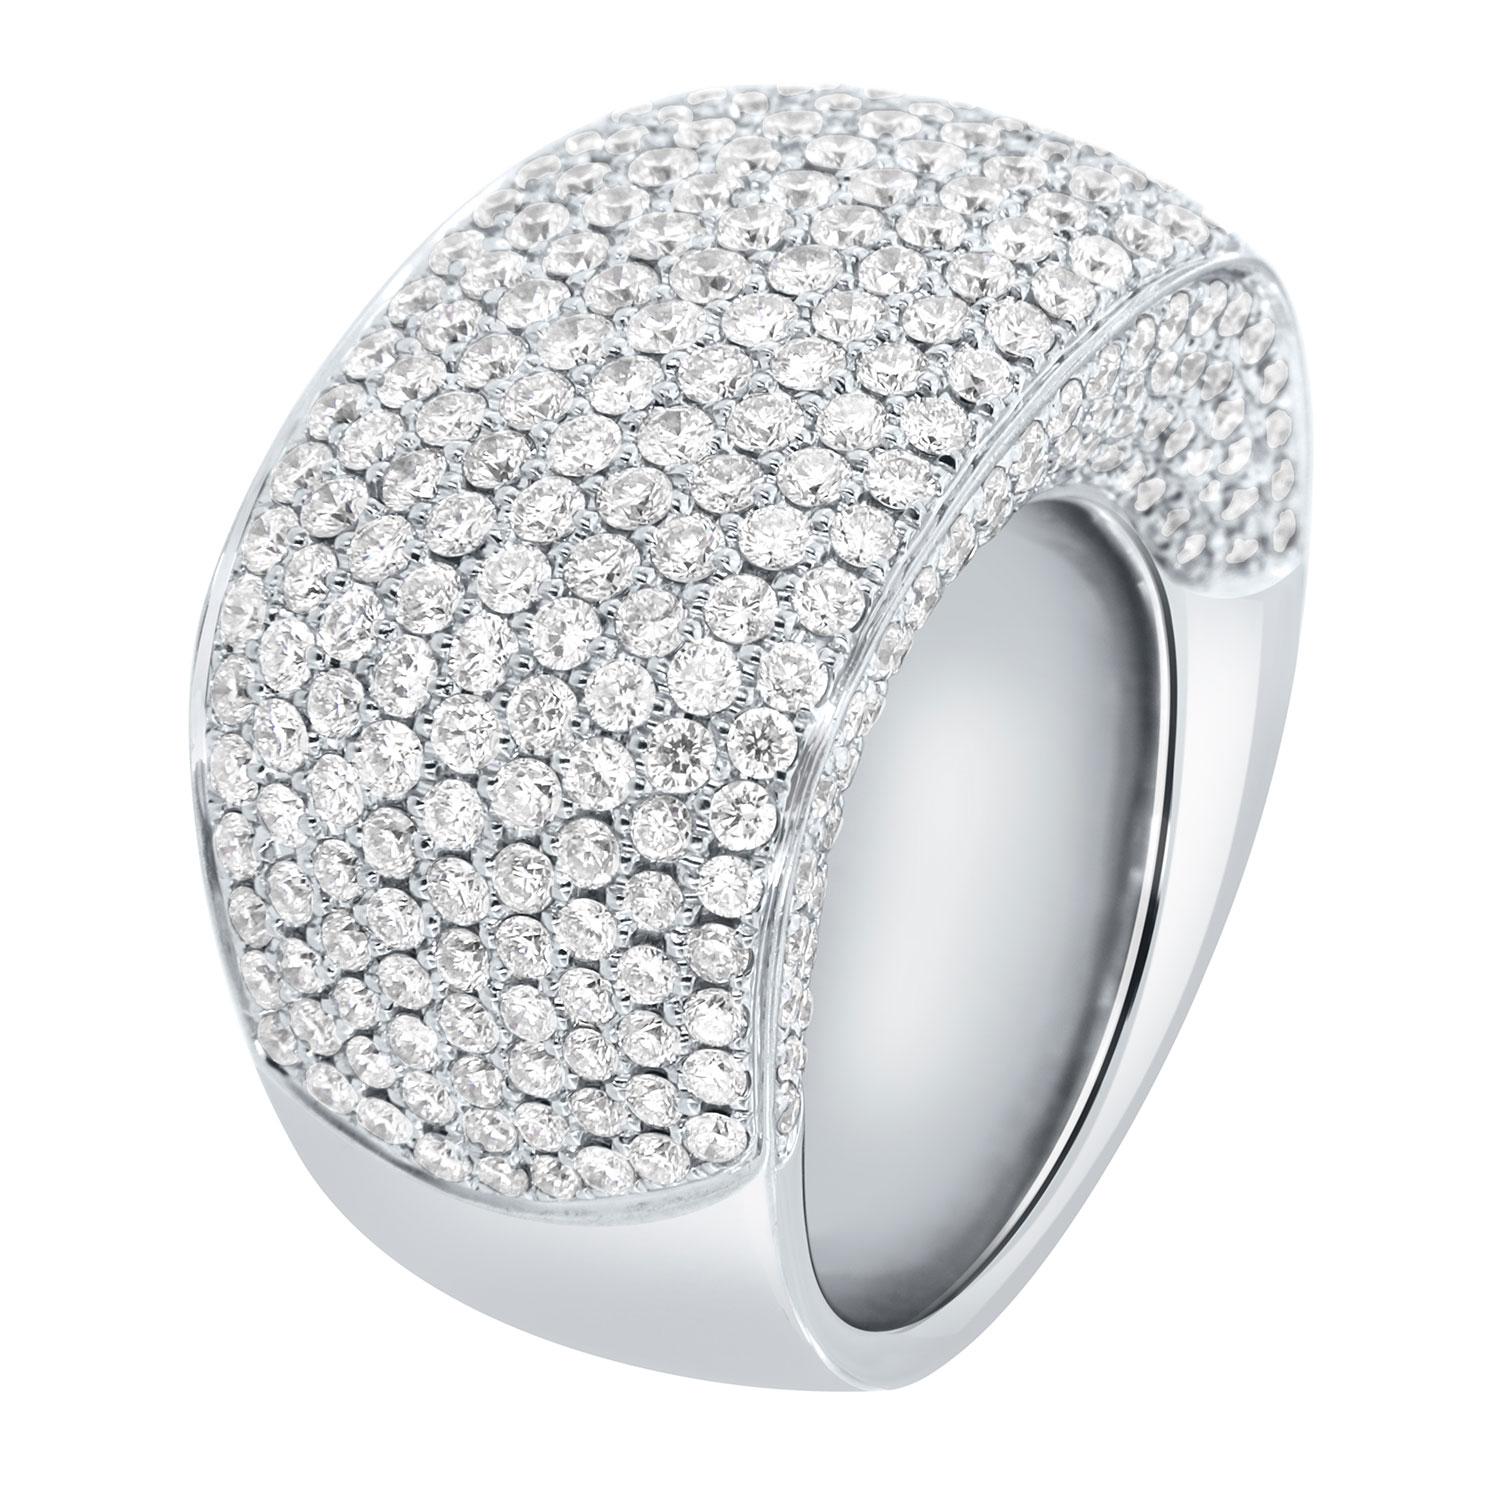 The artistic ring features a 4.20 carat of brilliant round diamond micro-prong set scattered on a 17mm wide top band slightly tapered to a 10 MM shank. 